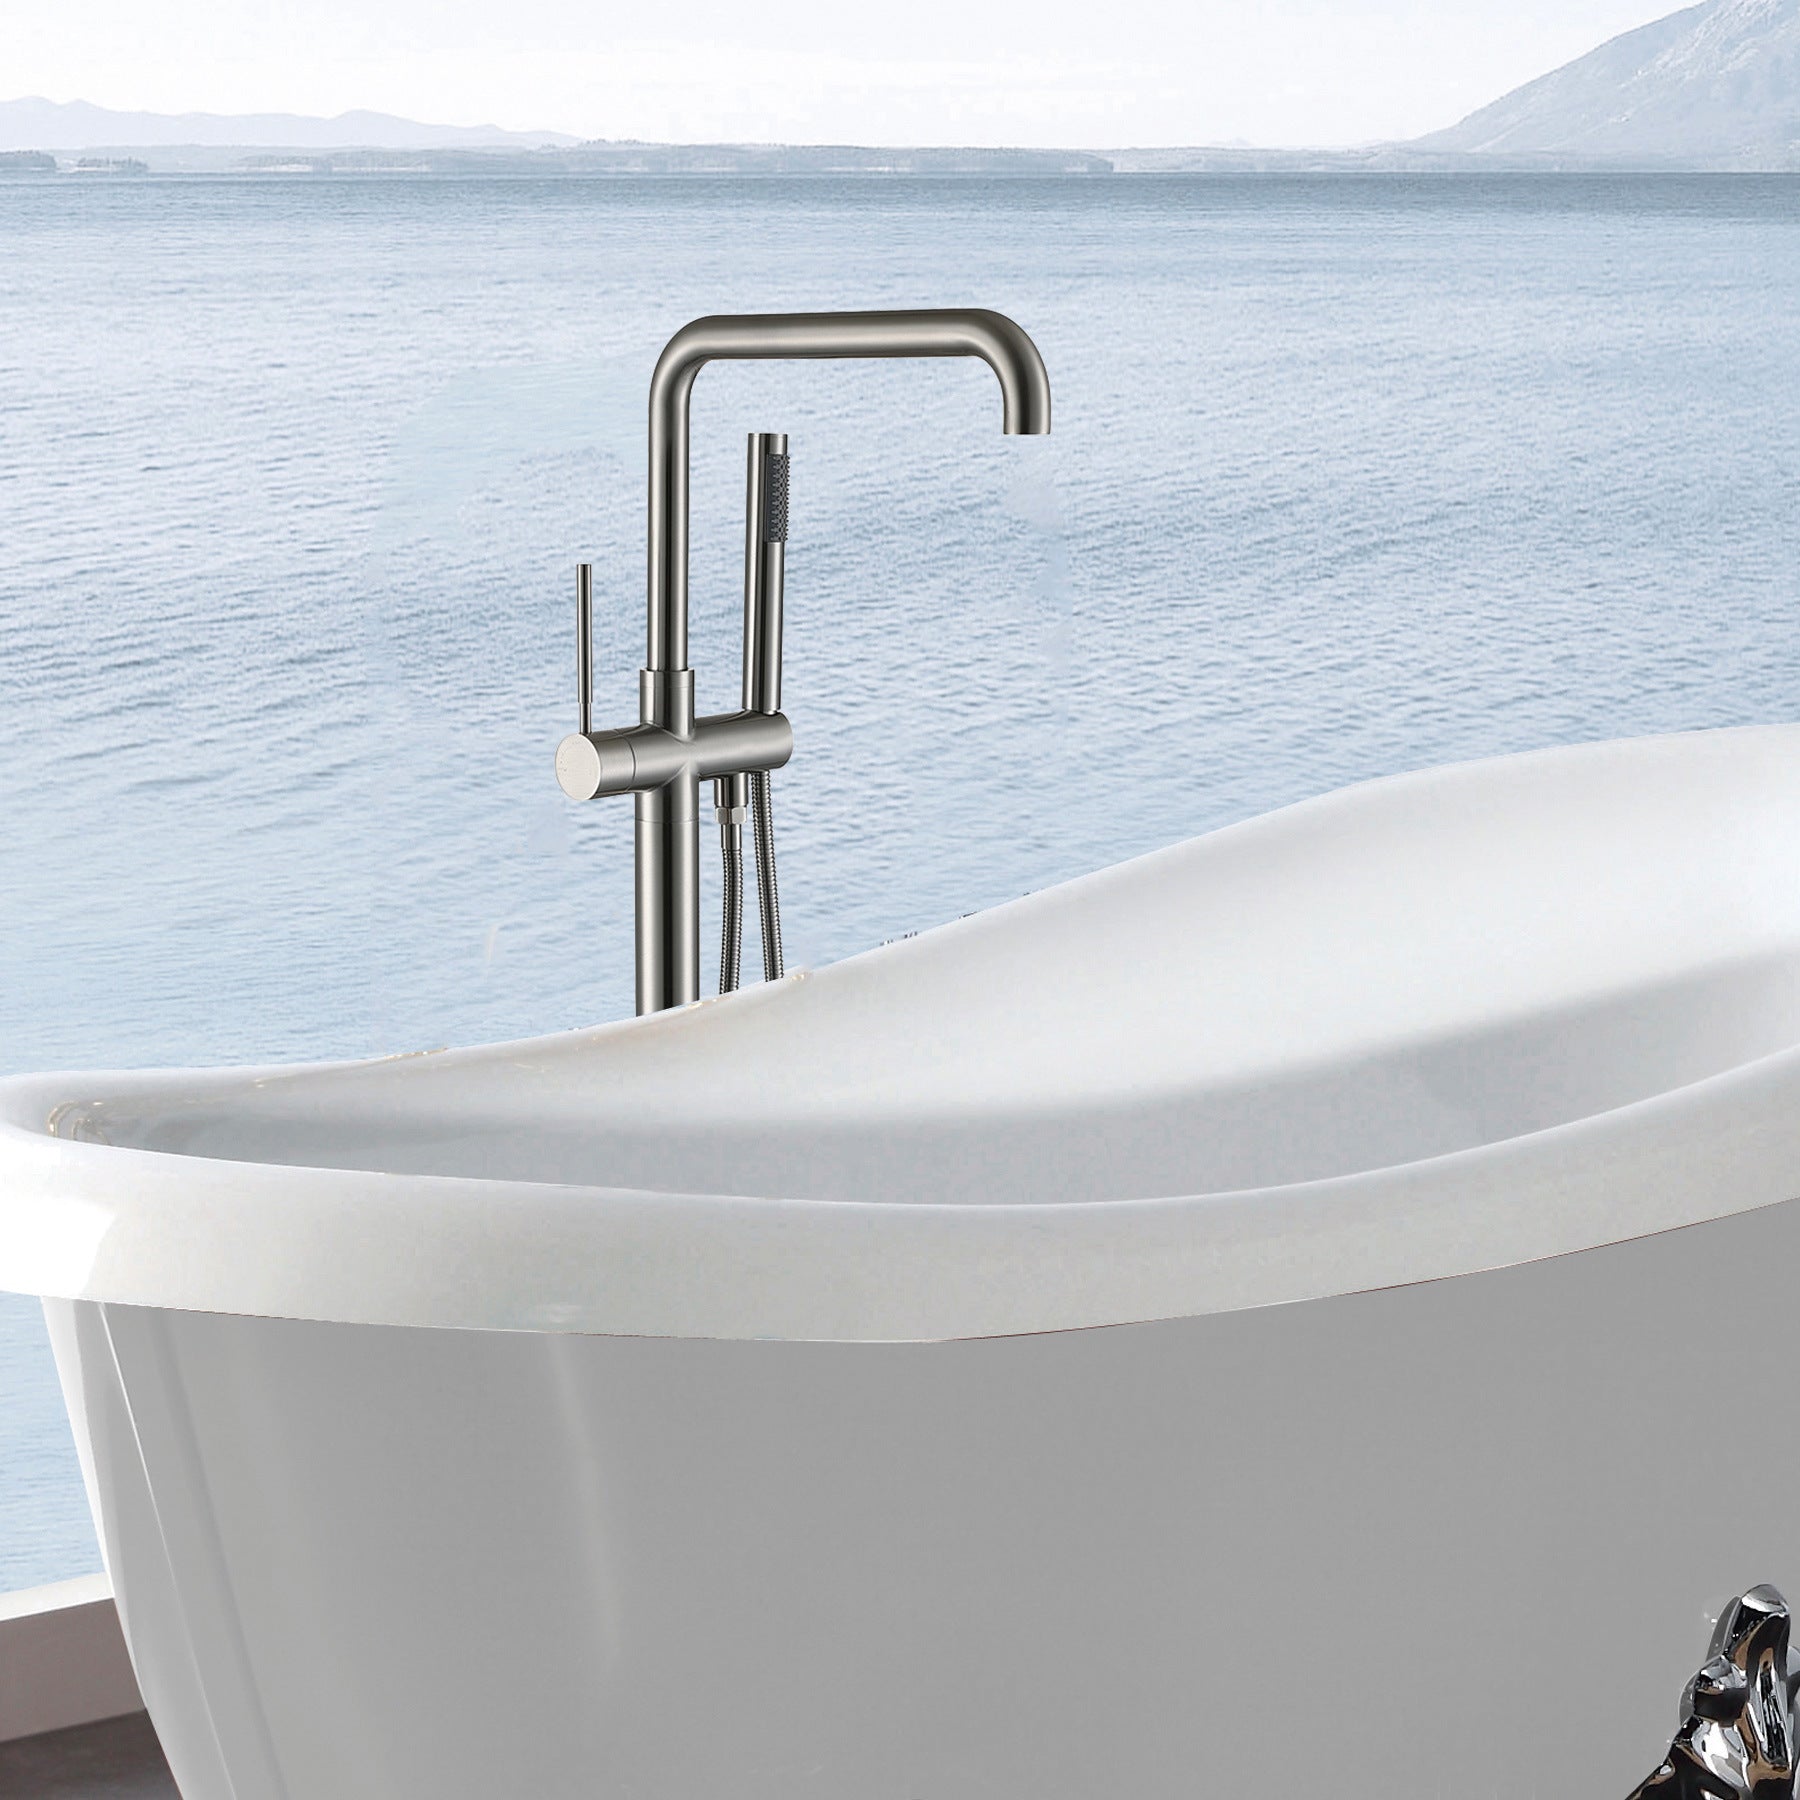 Freestanding Bathtub Faucet with Hand Shower Home Decor by Design